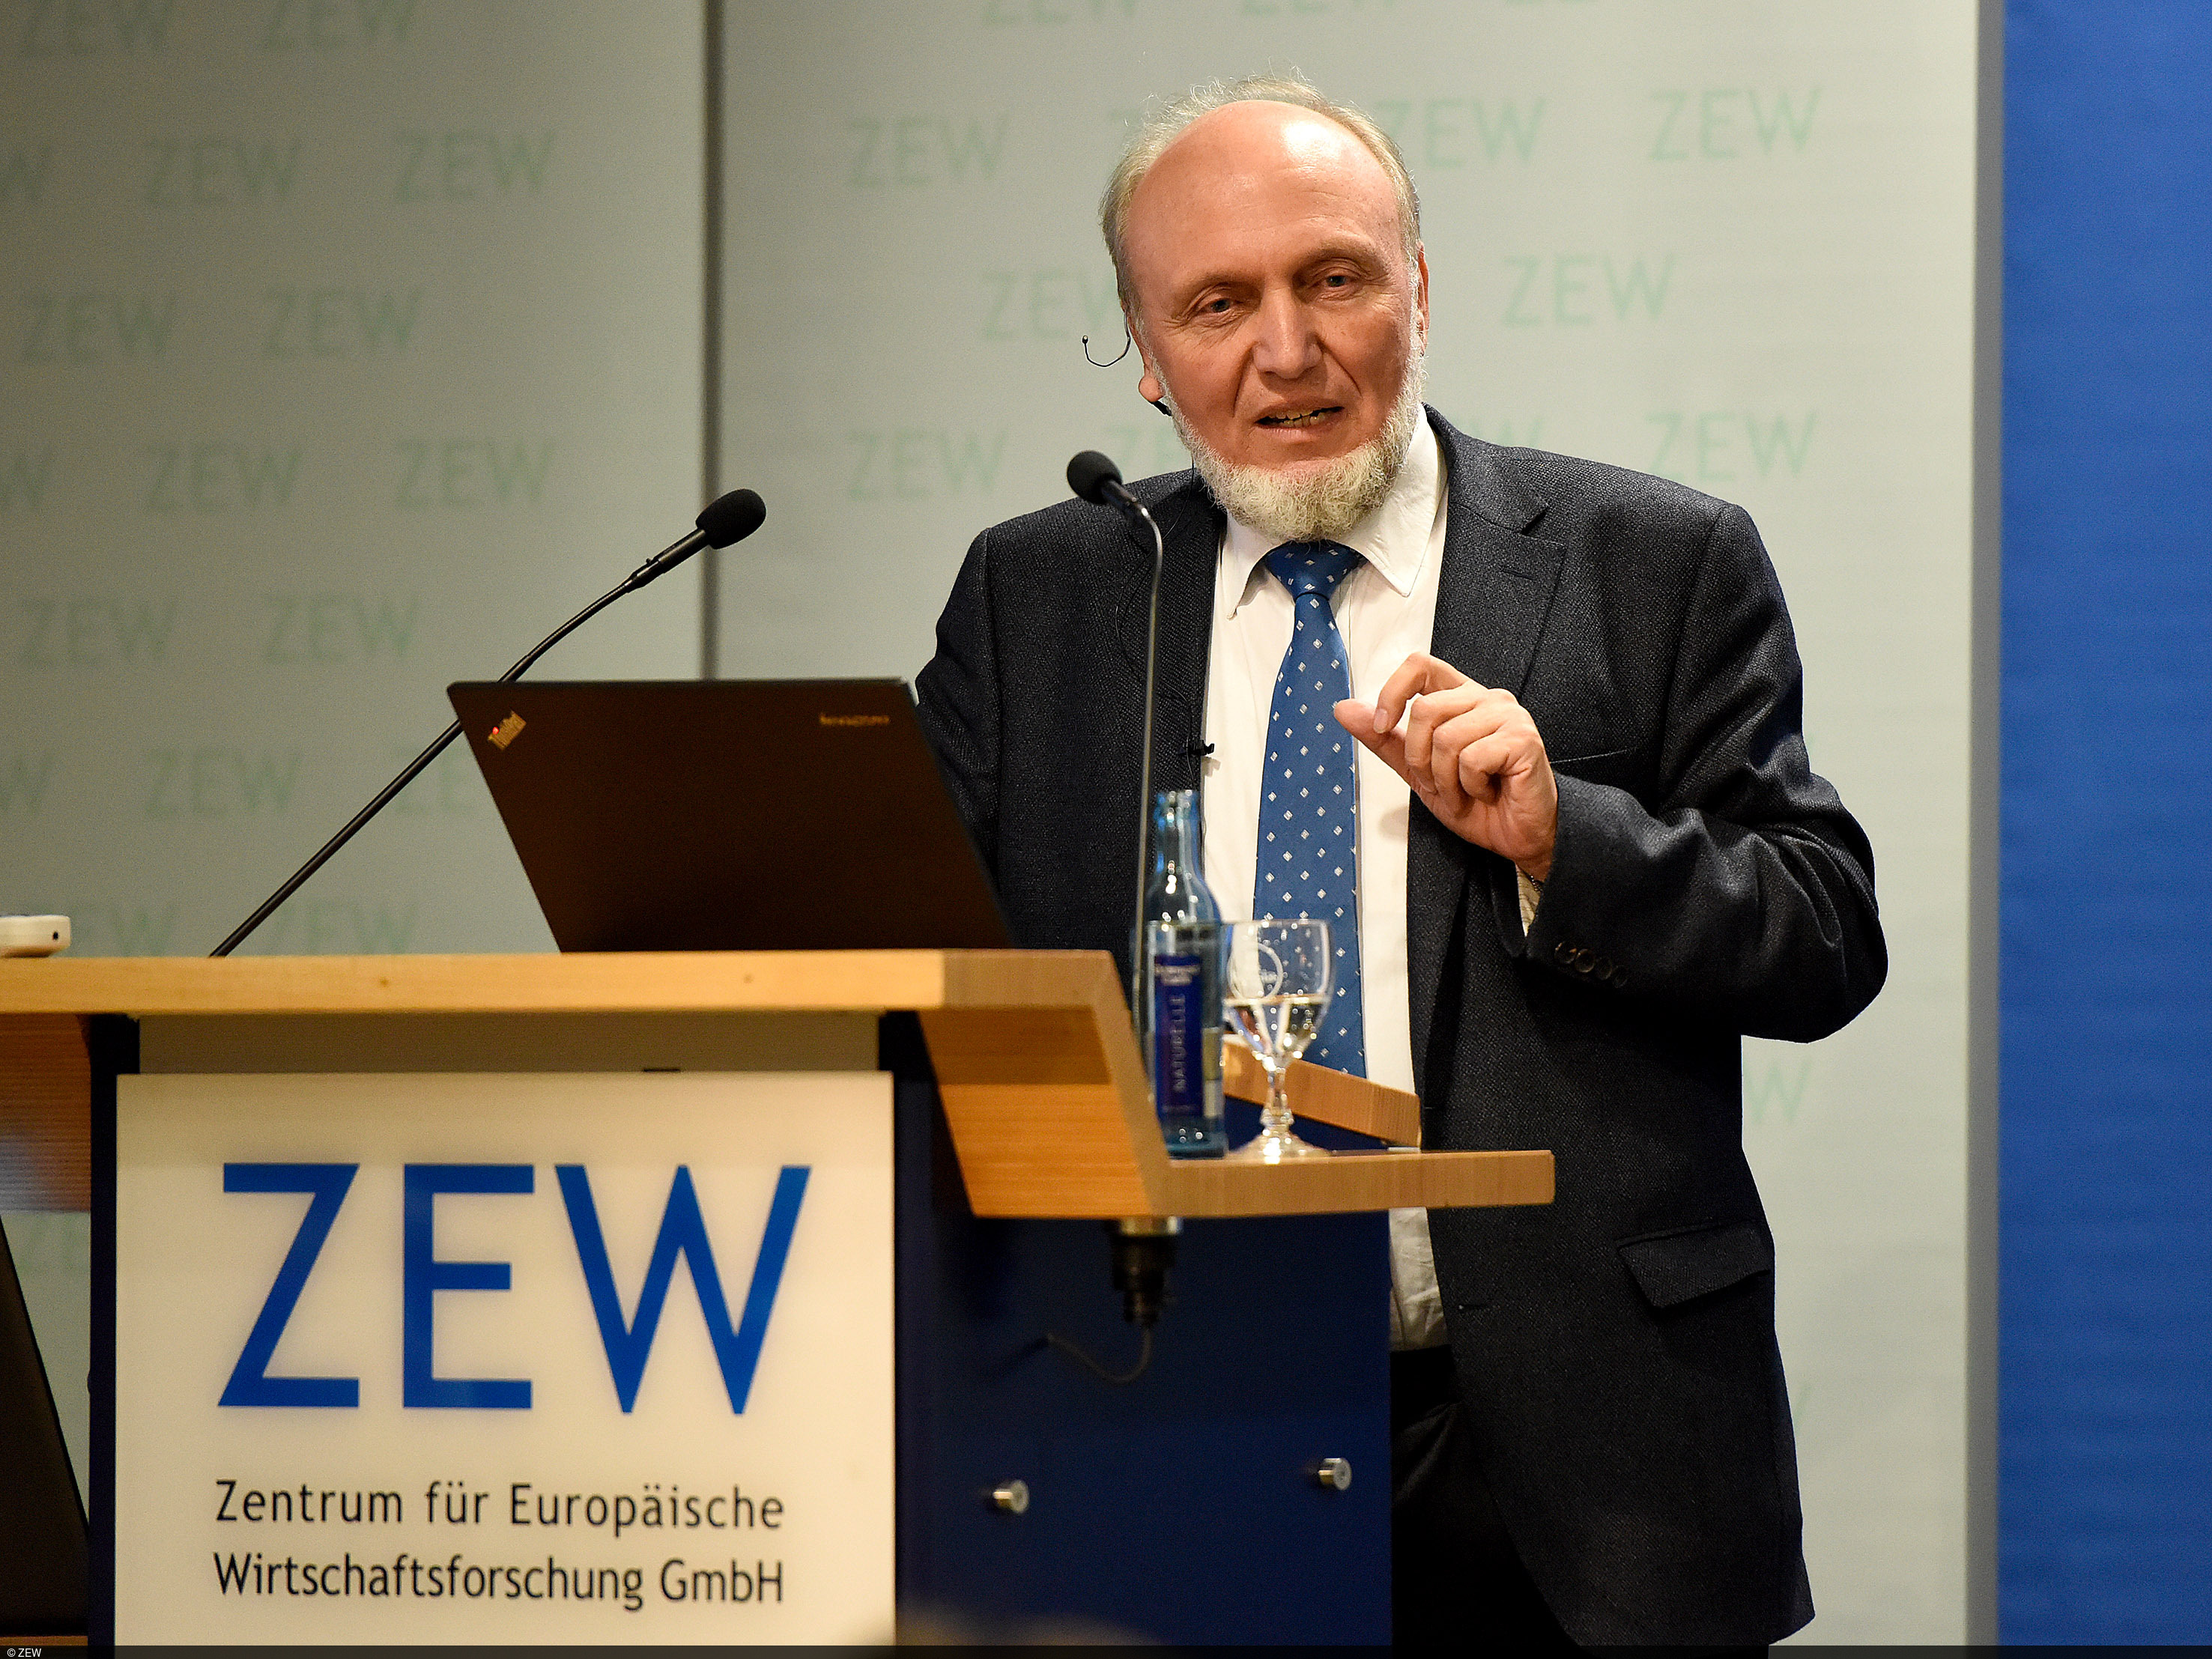 Hans-Werner Sinn during his lecture on "Europe after the Brexit" at ZEW